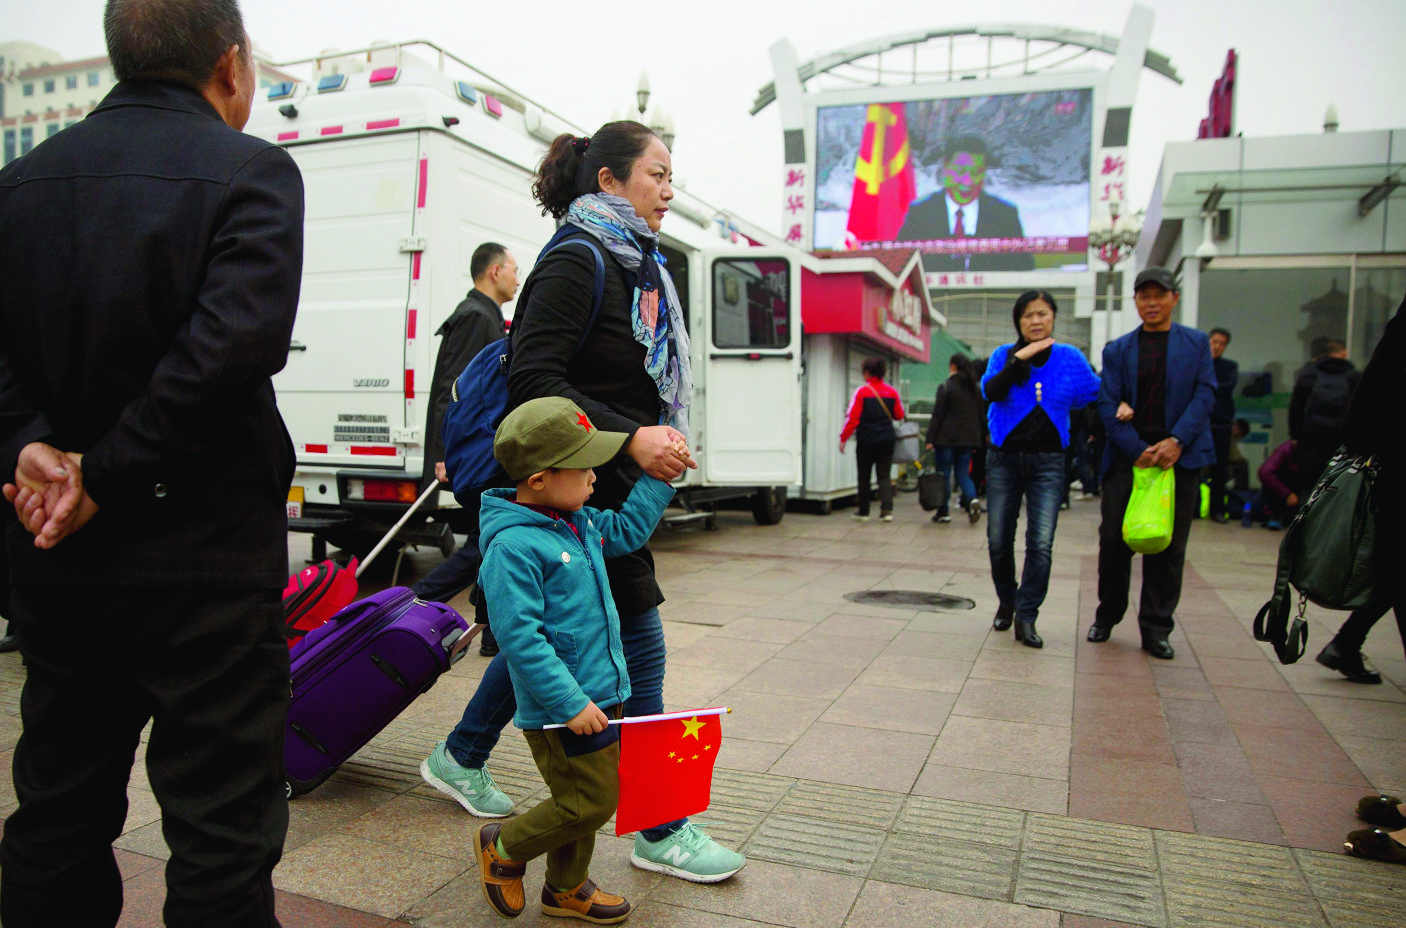 A woman and a boy carrying a Chinese flag walk past a television screen outside of the Beijing Railway Station showing a live broadcast of Chinese President Xi Jinping introducing members of the Politburo Standing Committee of China's 19th Party Congress at the Great Hall of the People in Beijing, Wednesday, Oct. 25, 2017. Communist Party leader Xi Jinping on Wednesday unveiled the lineup of the party's highest body who will rule alongside him as he embarks on a second five-year term as party leader. (AP Photo/Mark Schiefelbein) China Party Congress